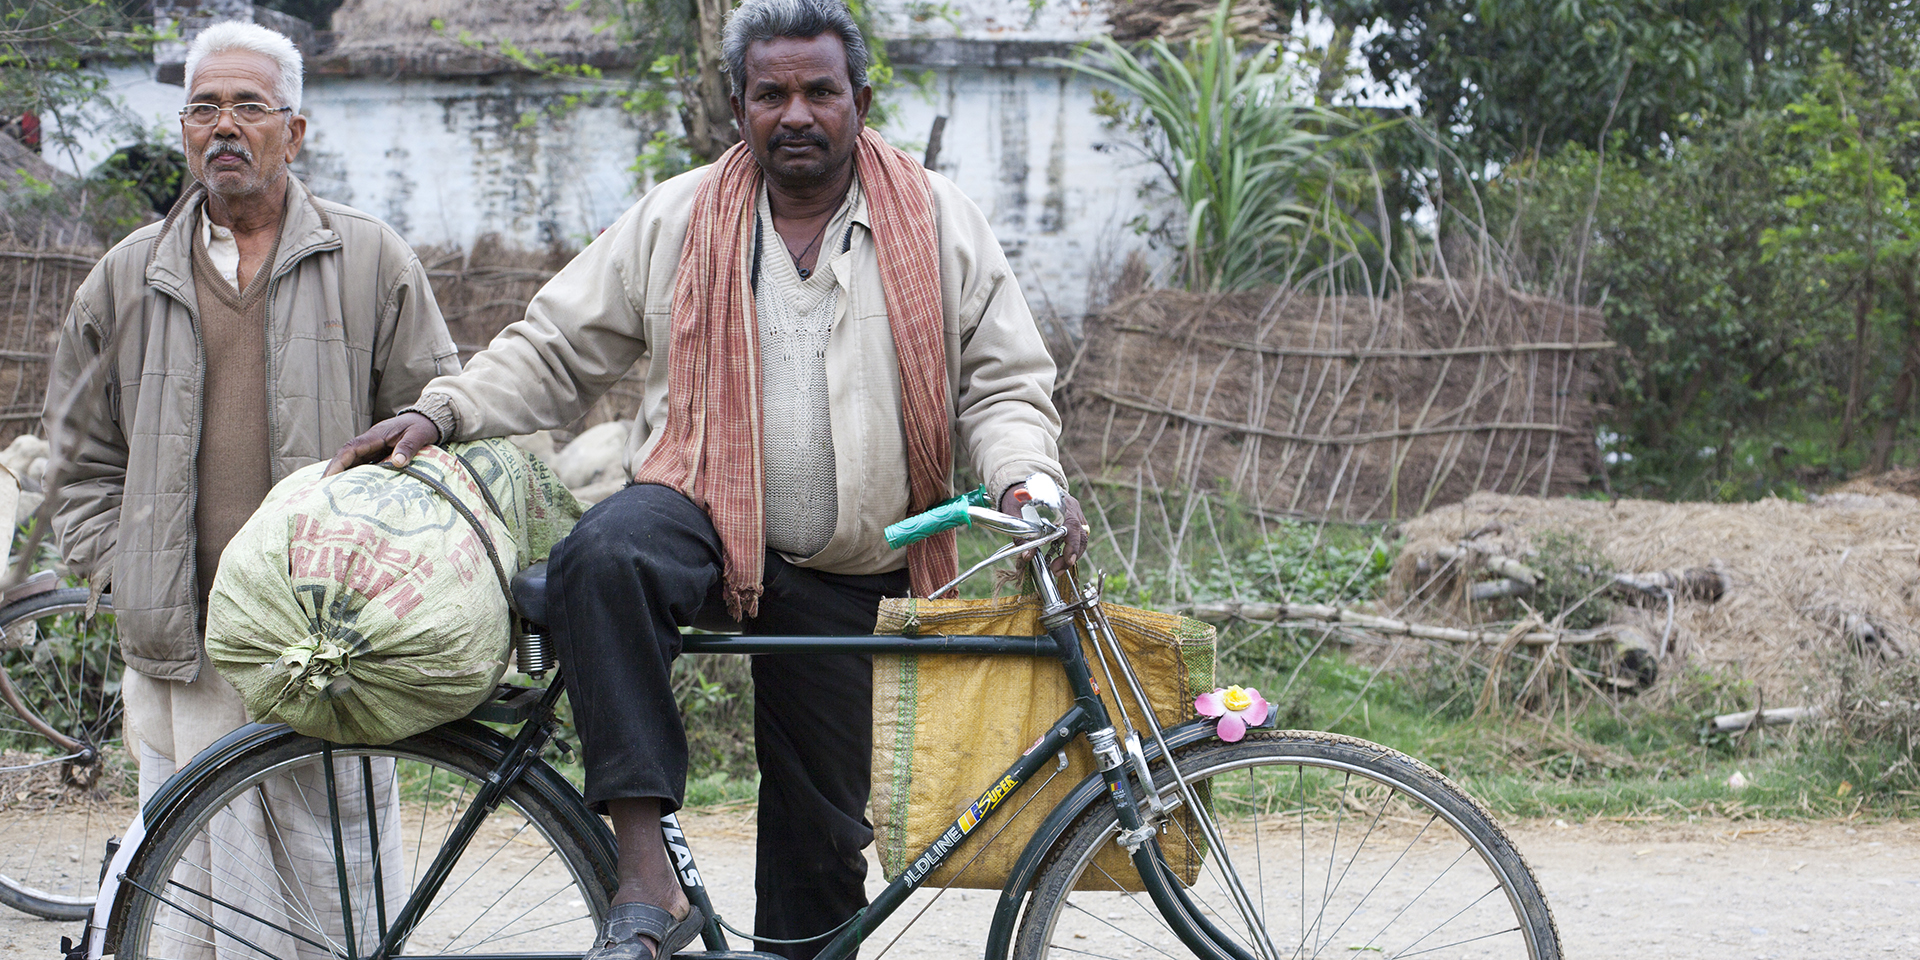 A man posing on a bicycle on a road with a village in the background.